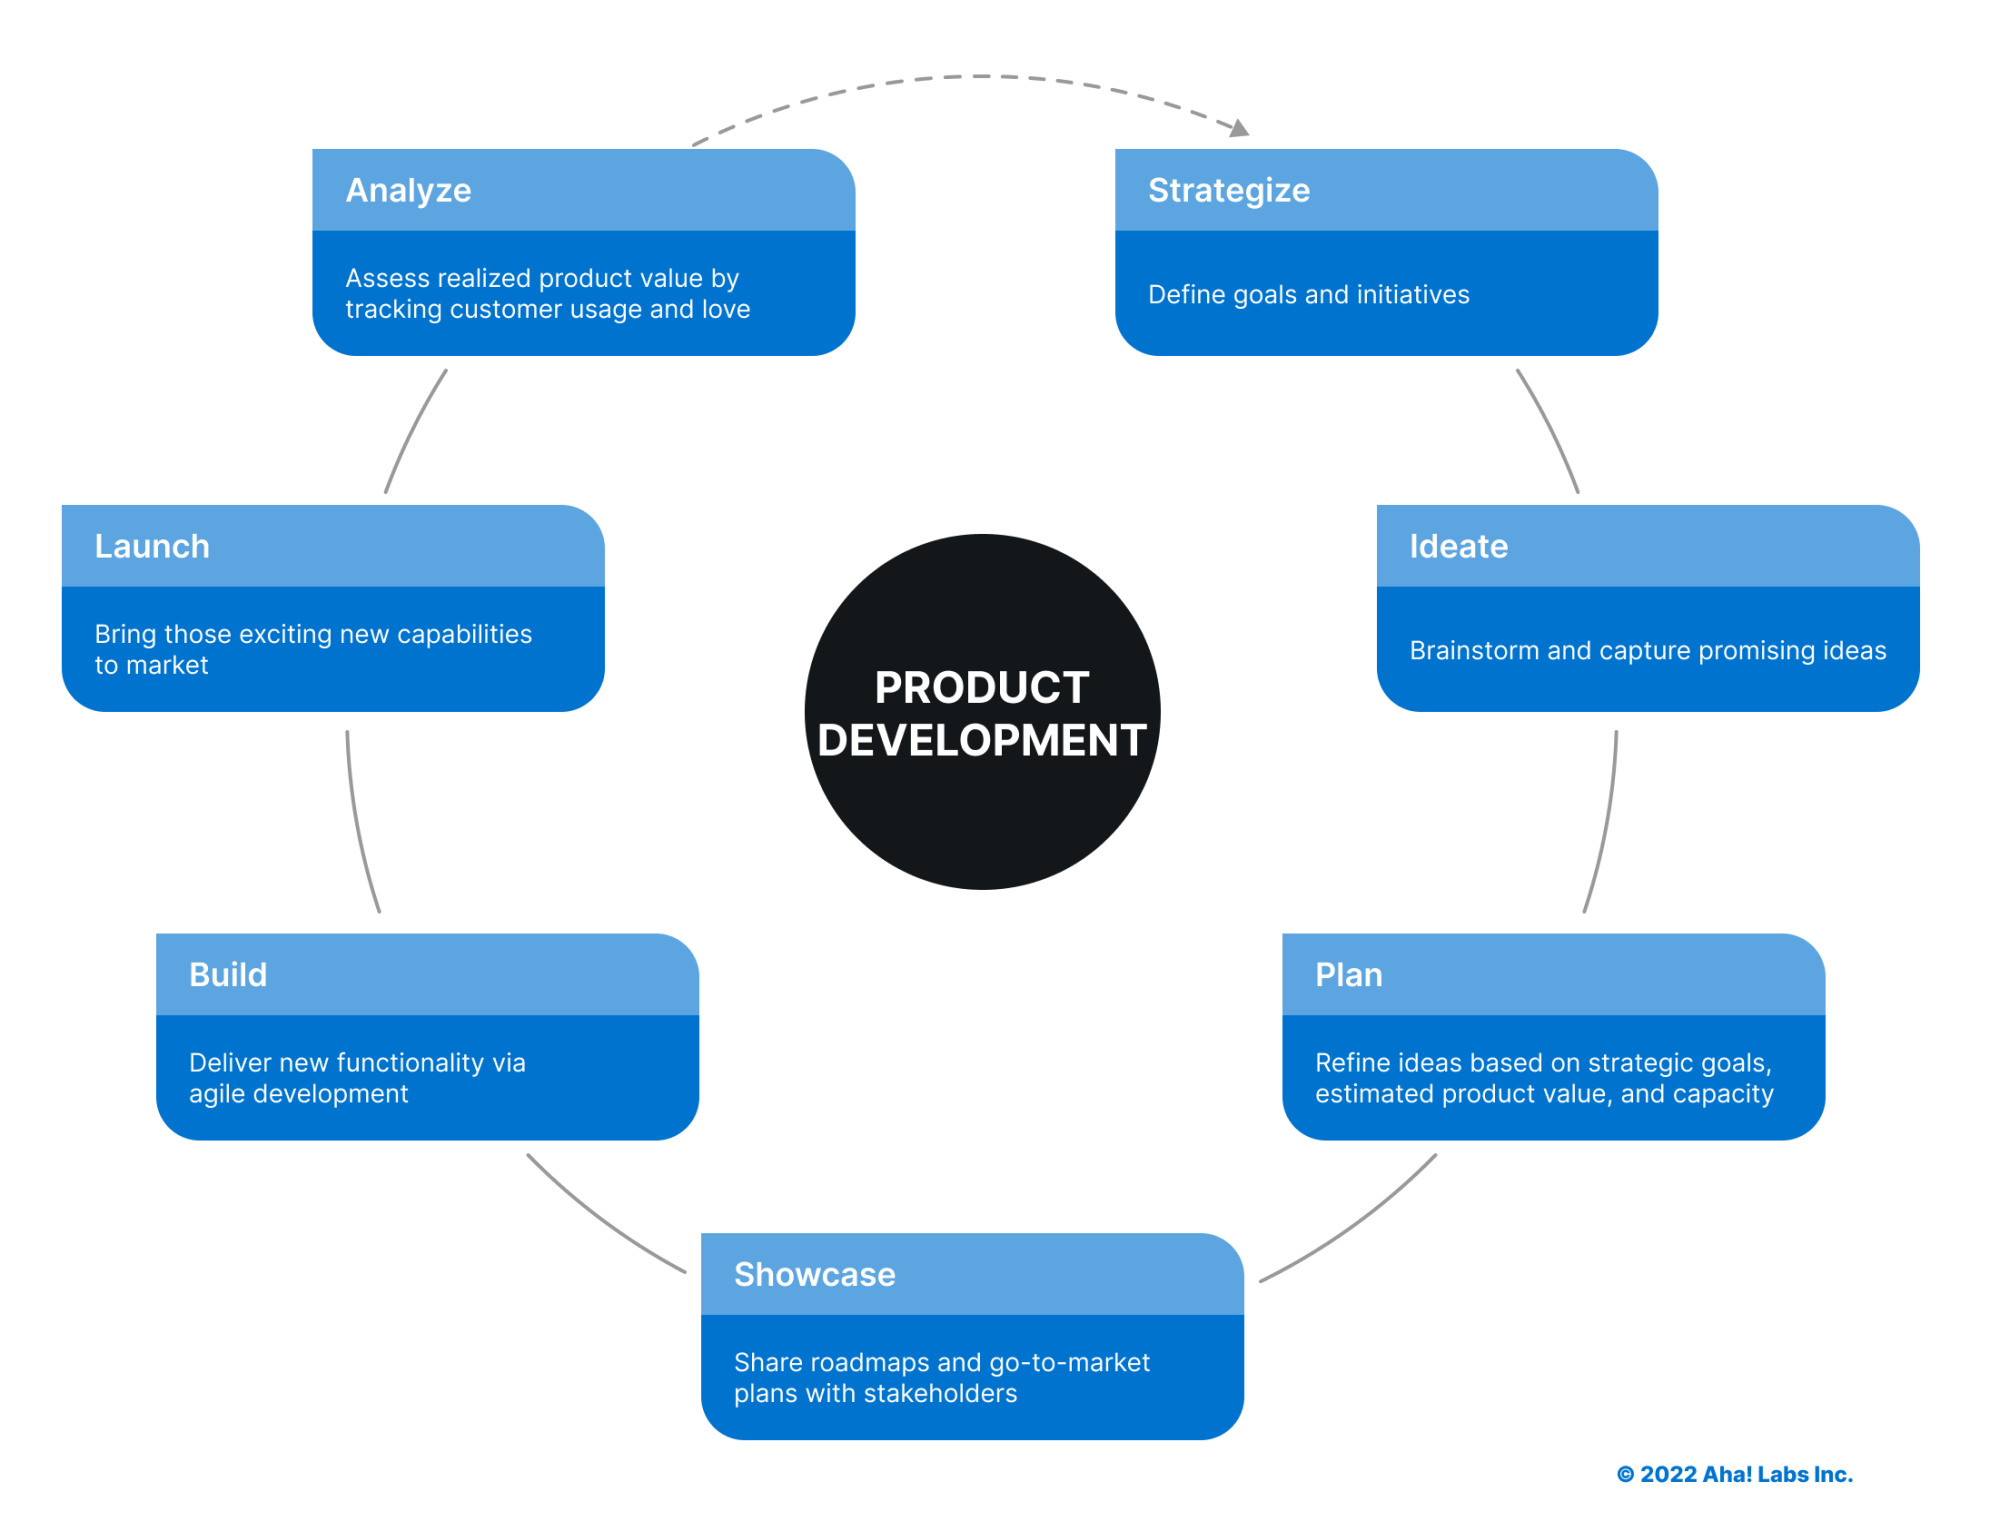 7 stages of product development